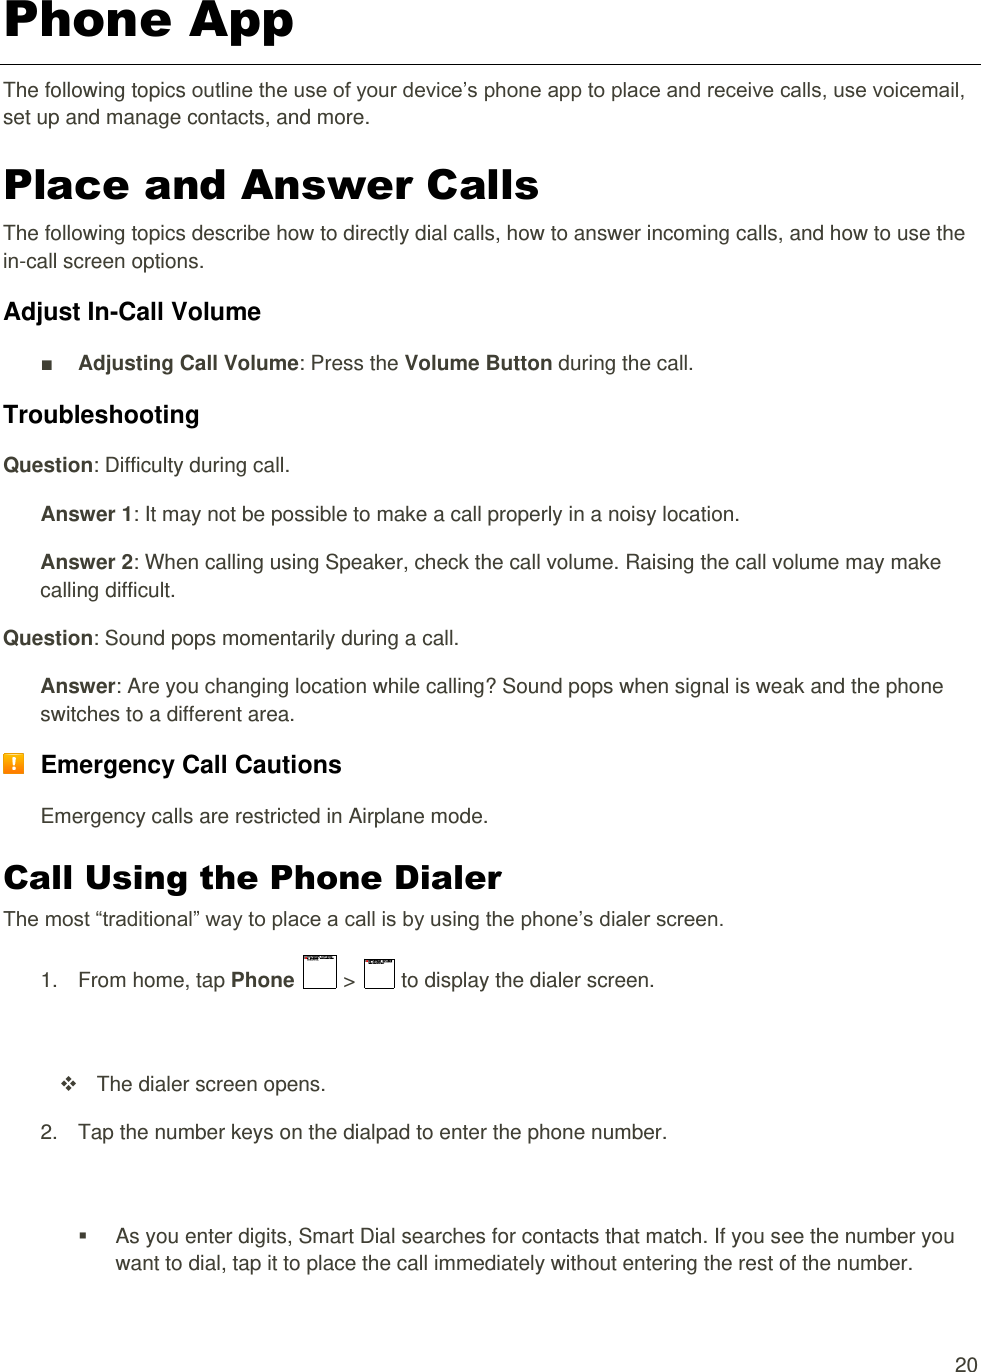  20 Phone App The following topics outline the use of your device’s phone app to place and receive calls, use voicemail, set up and manage contacts, and more. Place and Answer Calls The following topics describe how to directly dial calls, how to answer incoming calls, and how to use the in-call screen options. Adjust In-Call Volume ■ Adjusting Call Volume: Press the Volume Button during the call. Troubleshooting Question: Difficulty during call. Answer 1: It may not be possible to make a call properly in a noisy location. Answer 2: When calling using Speaker, check the call volume. Raising the call volume may make calling difficult. Question: Sound pops momentarily during a call. Answer: Are you changing location while calling? Sound pops when signal is weak and the phone switches to a different area.  Emergency Call Cautions Emergency calls are restricted in Airplane mode. Call Using the Phone Dialer The most “traditional” way to place a call is by using the phone’s dialer screen.  1.  From home, tap Phone   &gt;   to display the dialer screen.     The dialer screen opens. 2.  Tap the number keys on the dialpad to enter the phone number.     As you enter digits, Smart Dial searches for contacts that match. If you see the number you want to dial, tap it to place the call immediately without entering the rest of the number. 